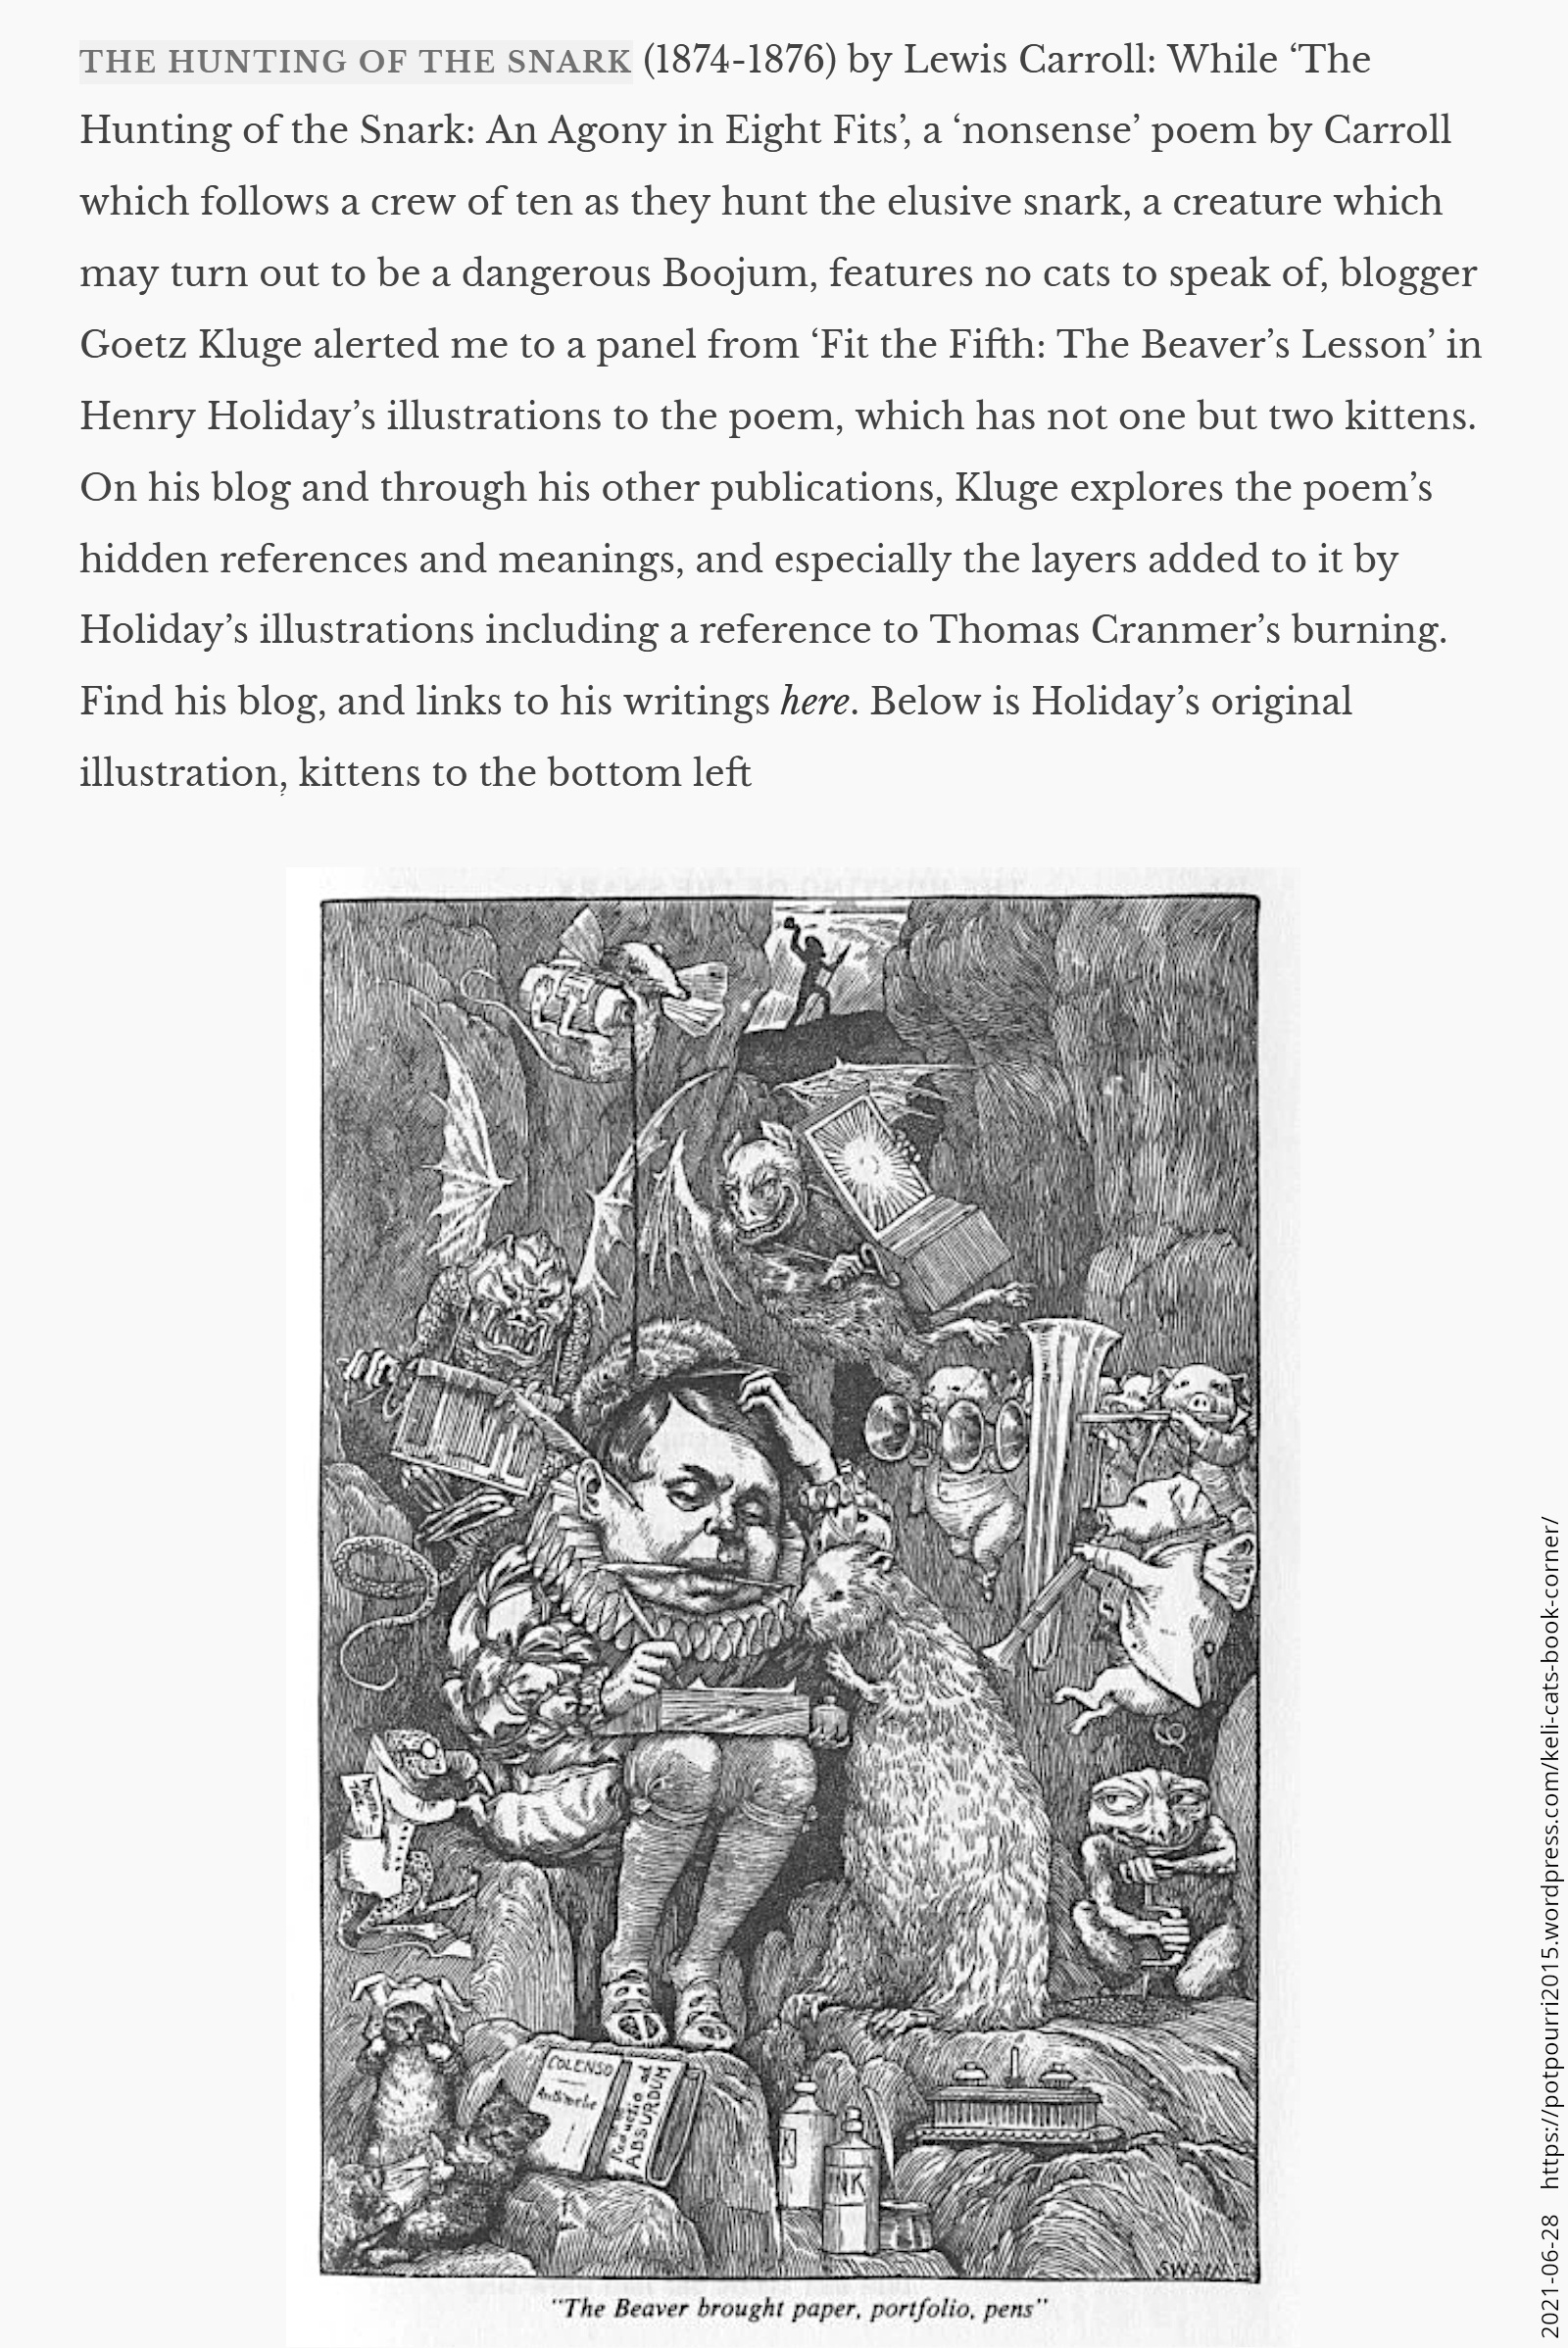 The Hunting of the Snark (1874-1876) by Lewis Carroll: While ‘The Hunting of the Snark: An Agony in Eight Fits’, a ‘nonsense’ poem by Carroll which follows a crew of ten as they hunt the elusive snark, a creature which may turn out to be a dangerous Boojum, features no cats to speak of, blogger Goetz Kluge alerted me to a panel from ‘Fit the Fifth: The Beaver’s Lesson’ in Henry Holiday’s illustrations to the poem, which has not one but two kittens. On his blog and through his other publications, Kluge explores the poem’s hidden references and meanings, and especially the layers added to it by Holiday’s illustrations including a reference to Thomas Cranmer’s burning. Find his blog, and links to his writings here. Below is Holiday’s original illustration, kittens to the bottom left